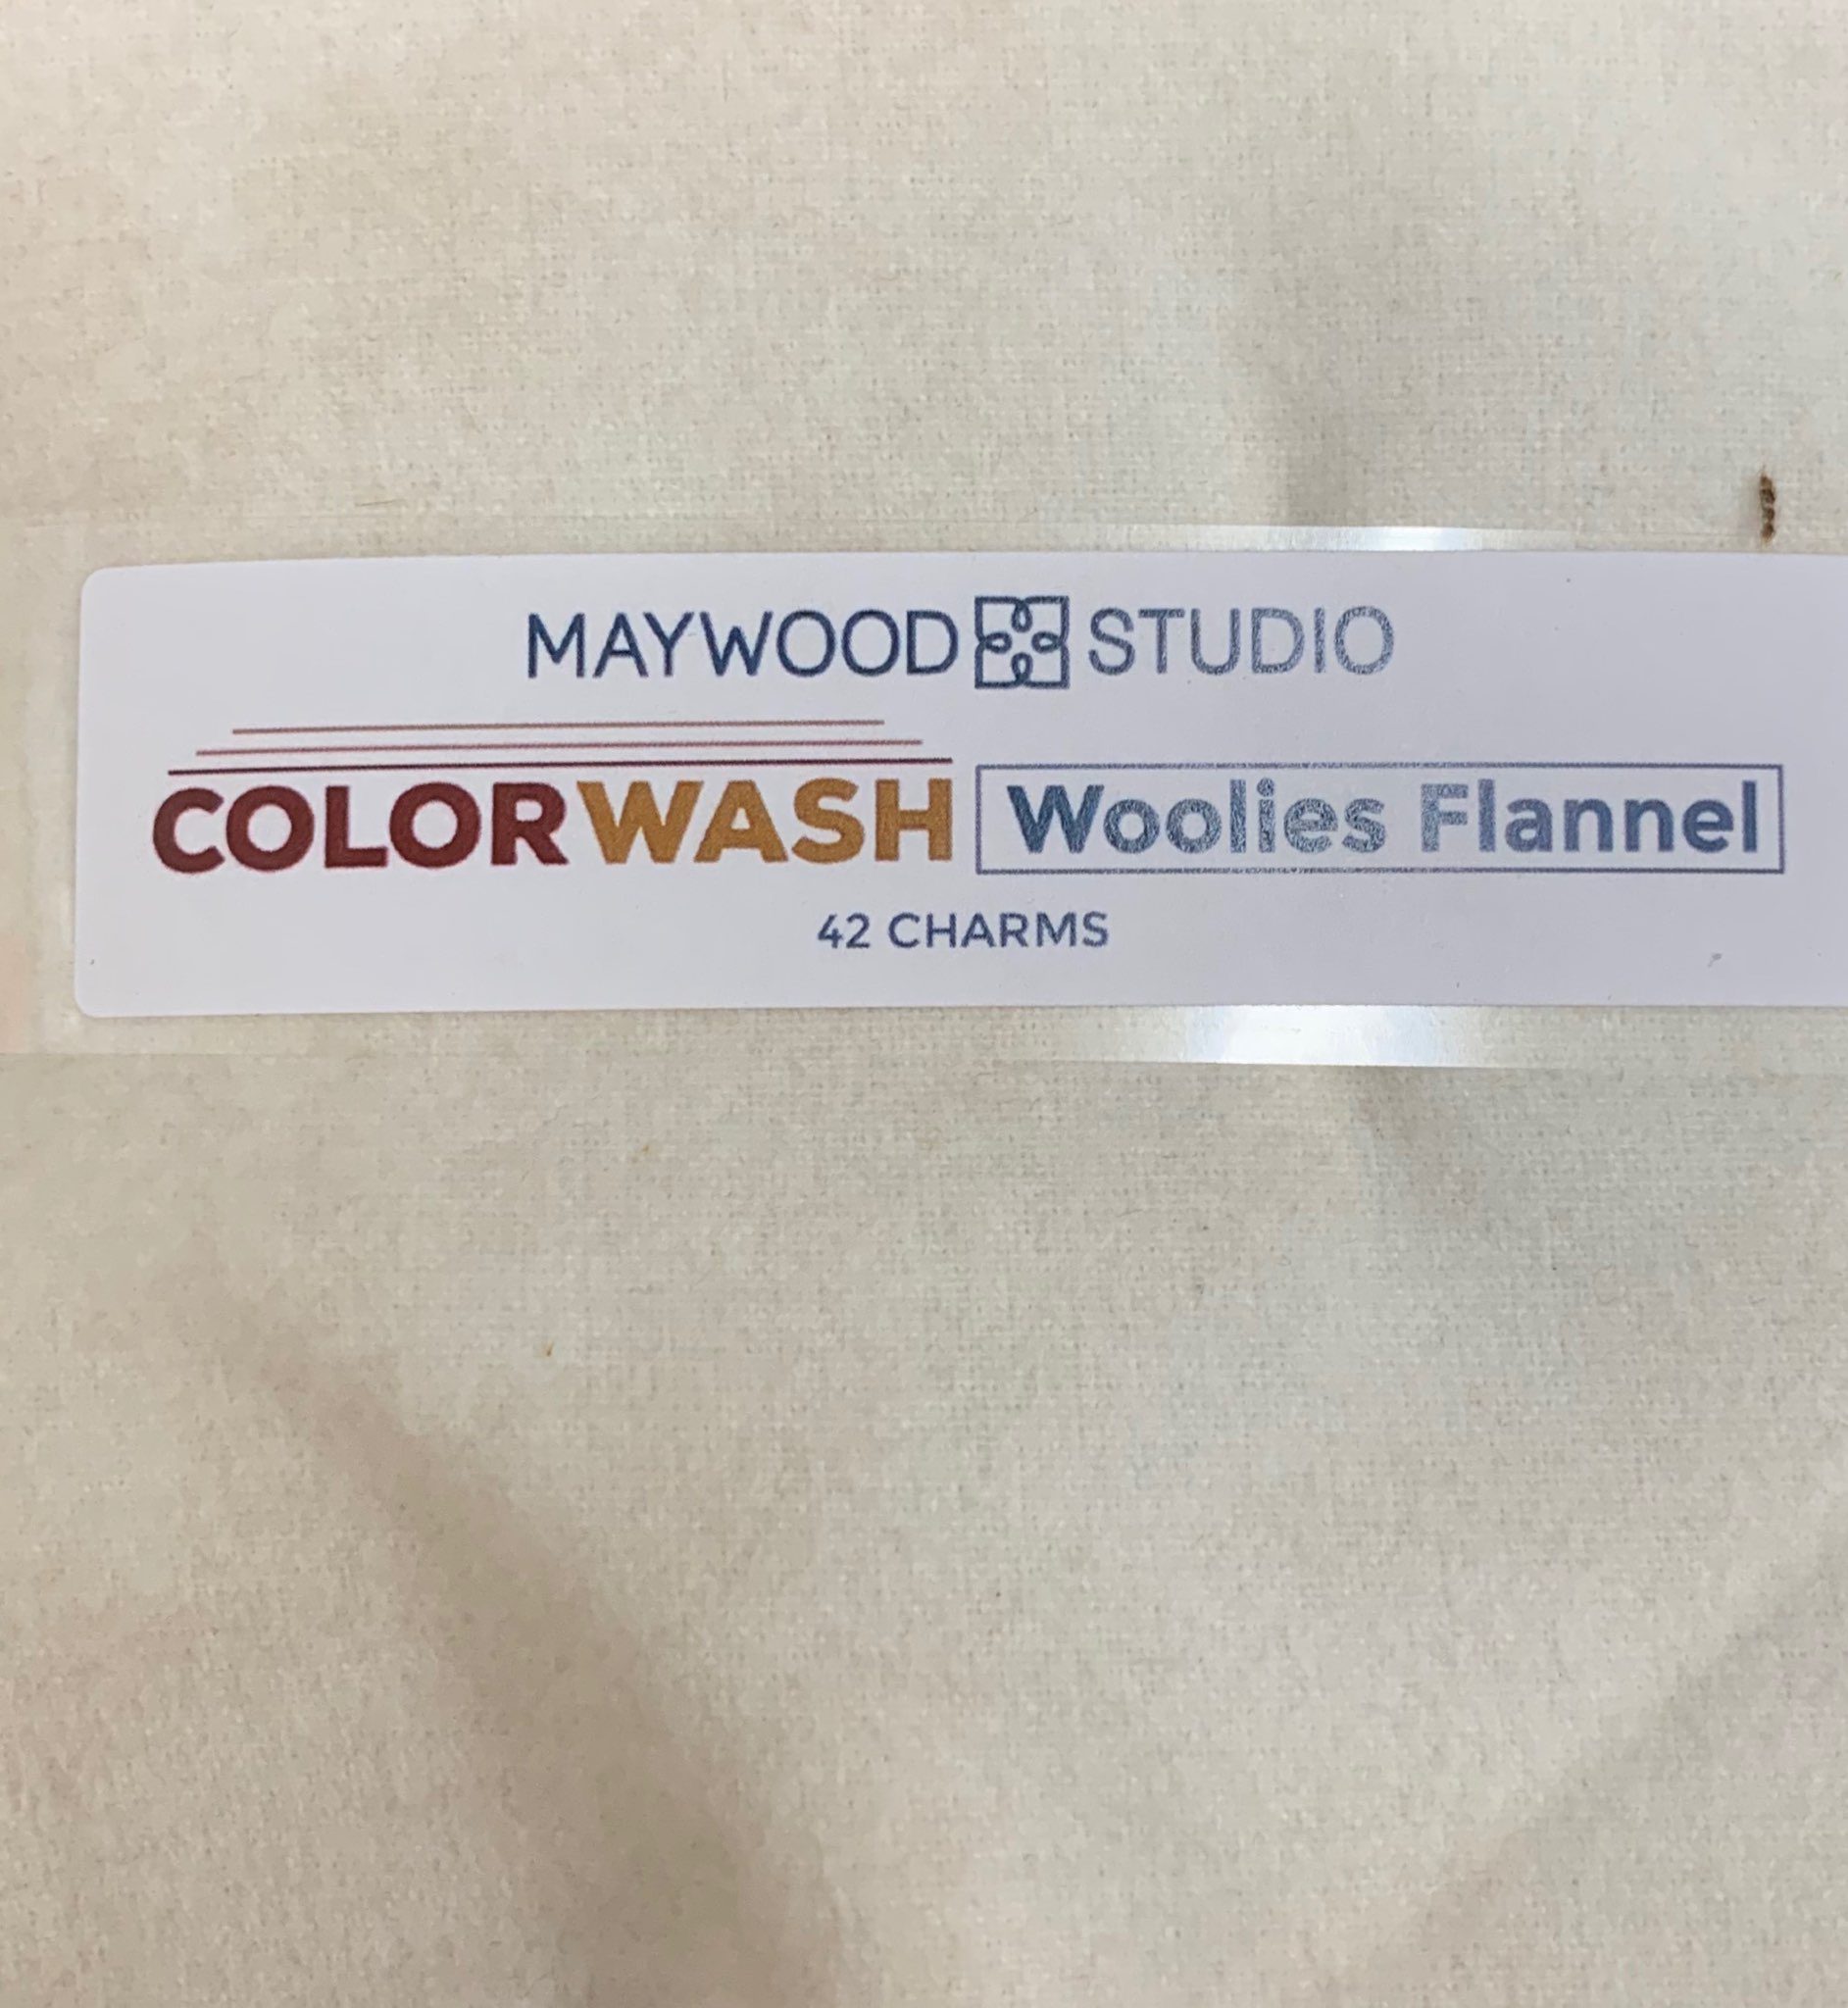 Color Wash Woolies Flannel - Charm Pack